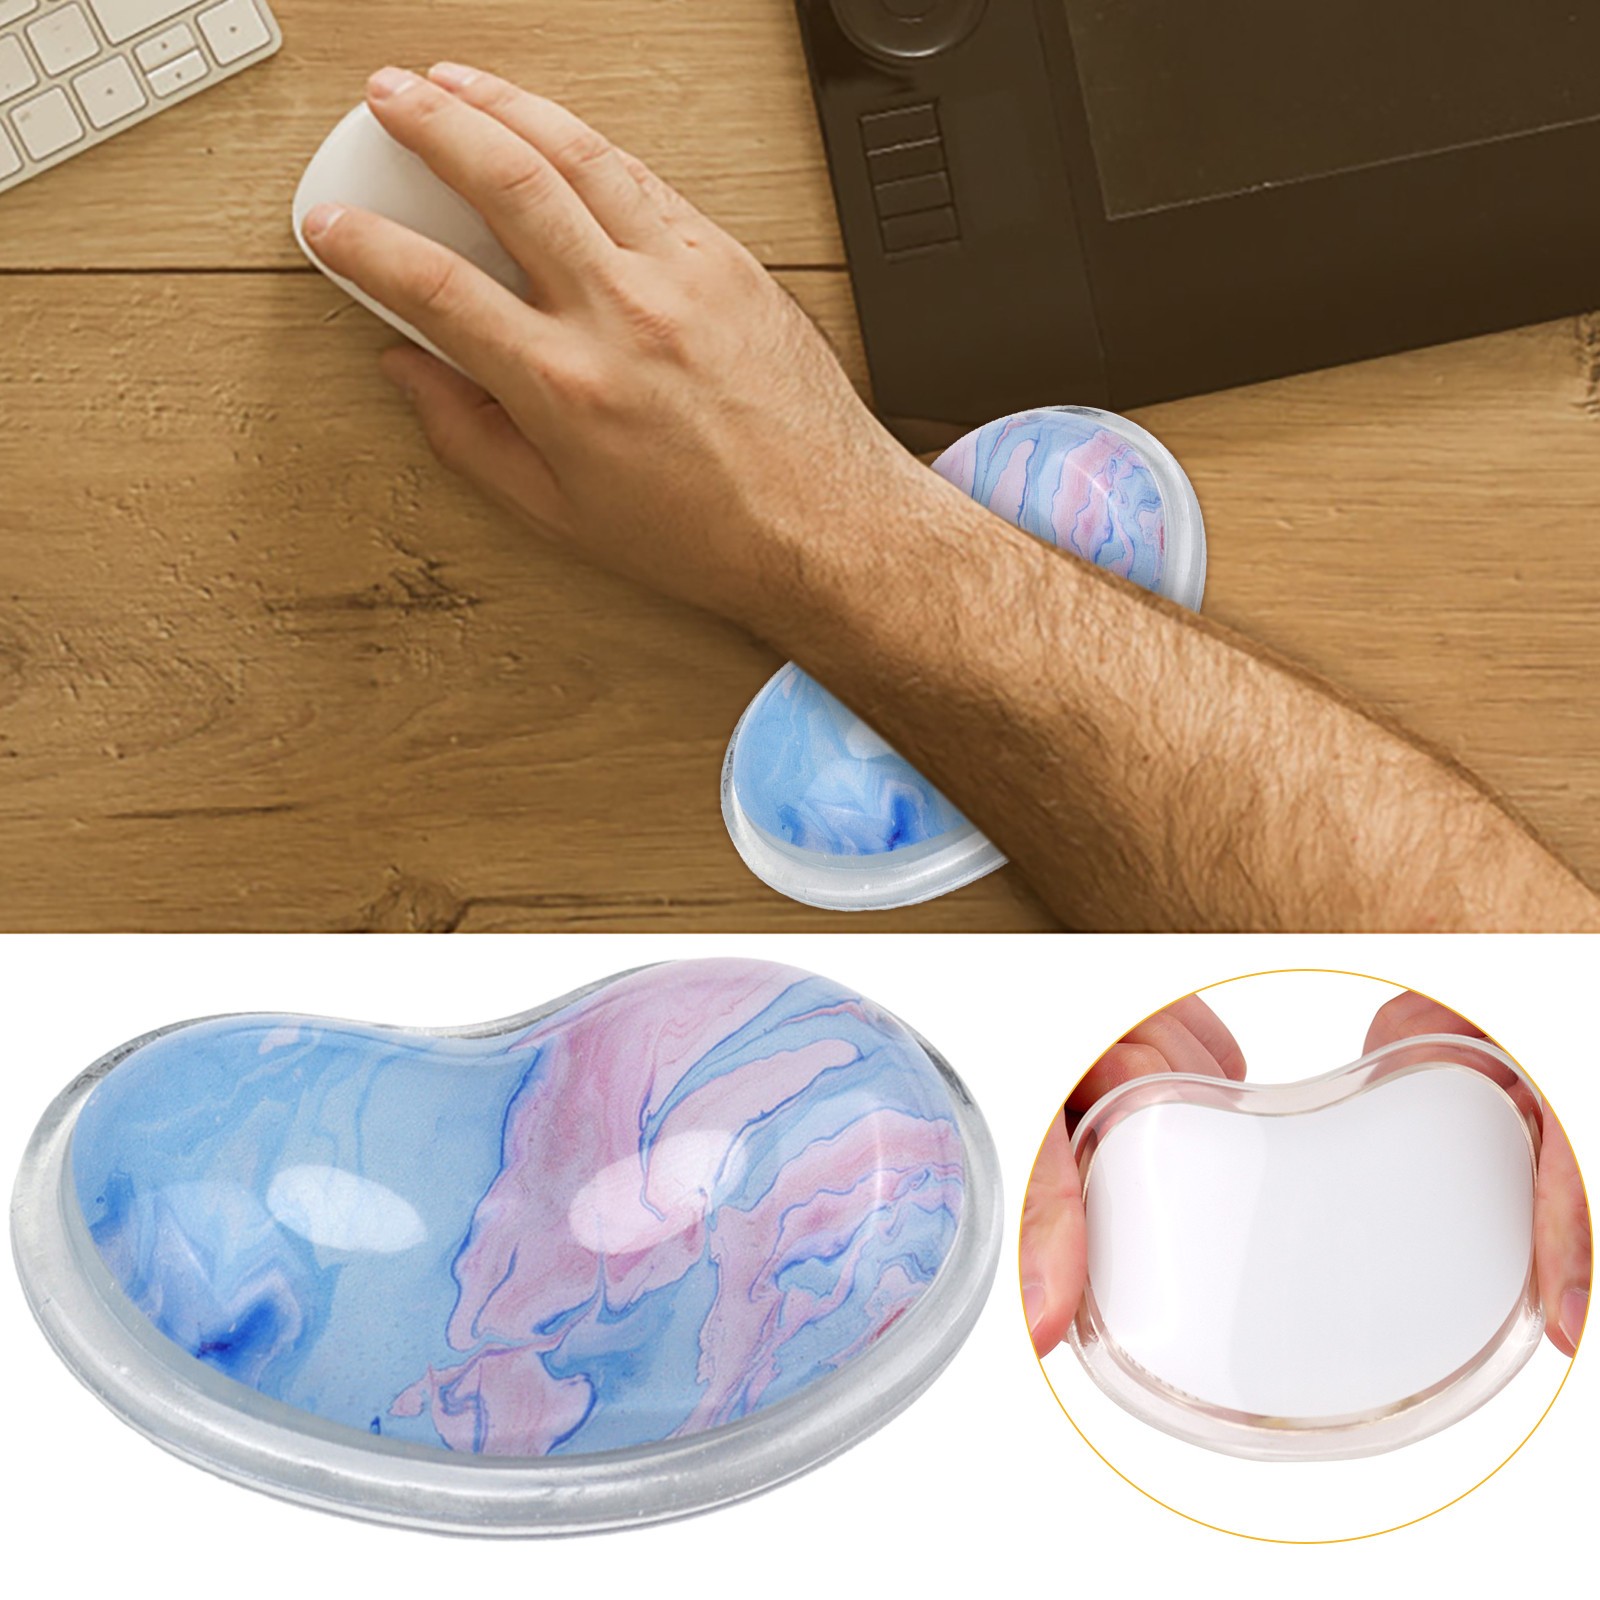 Mouse Pad Gaming Mouse Pad Wrist Support Silicone Gel Wrist Rest Heart Shaped Translucence Ergonomic Mouse Pad Effectively Wrist Fatigue Comfortable Keyboard Mouse Pad With Wrist Rest - image 1 of 9